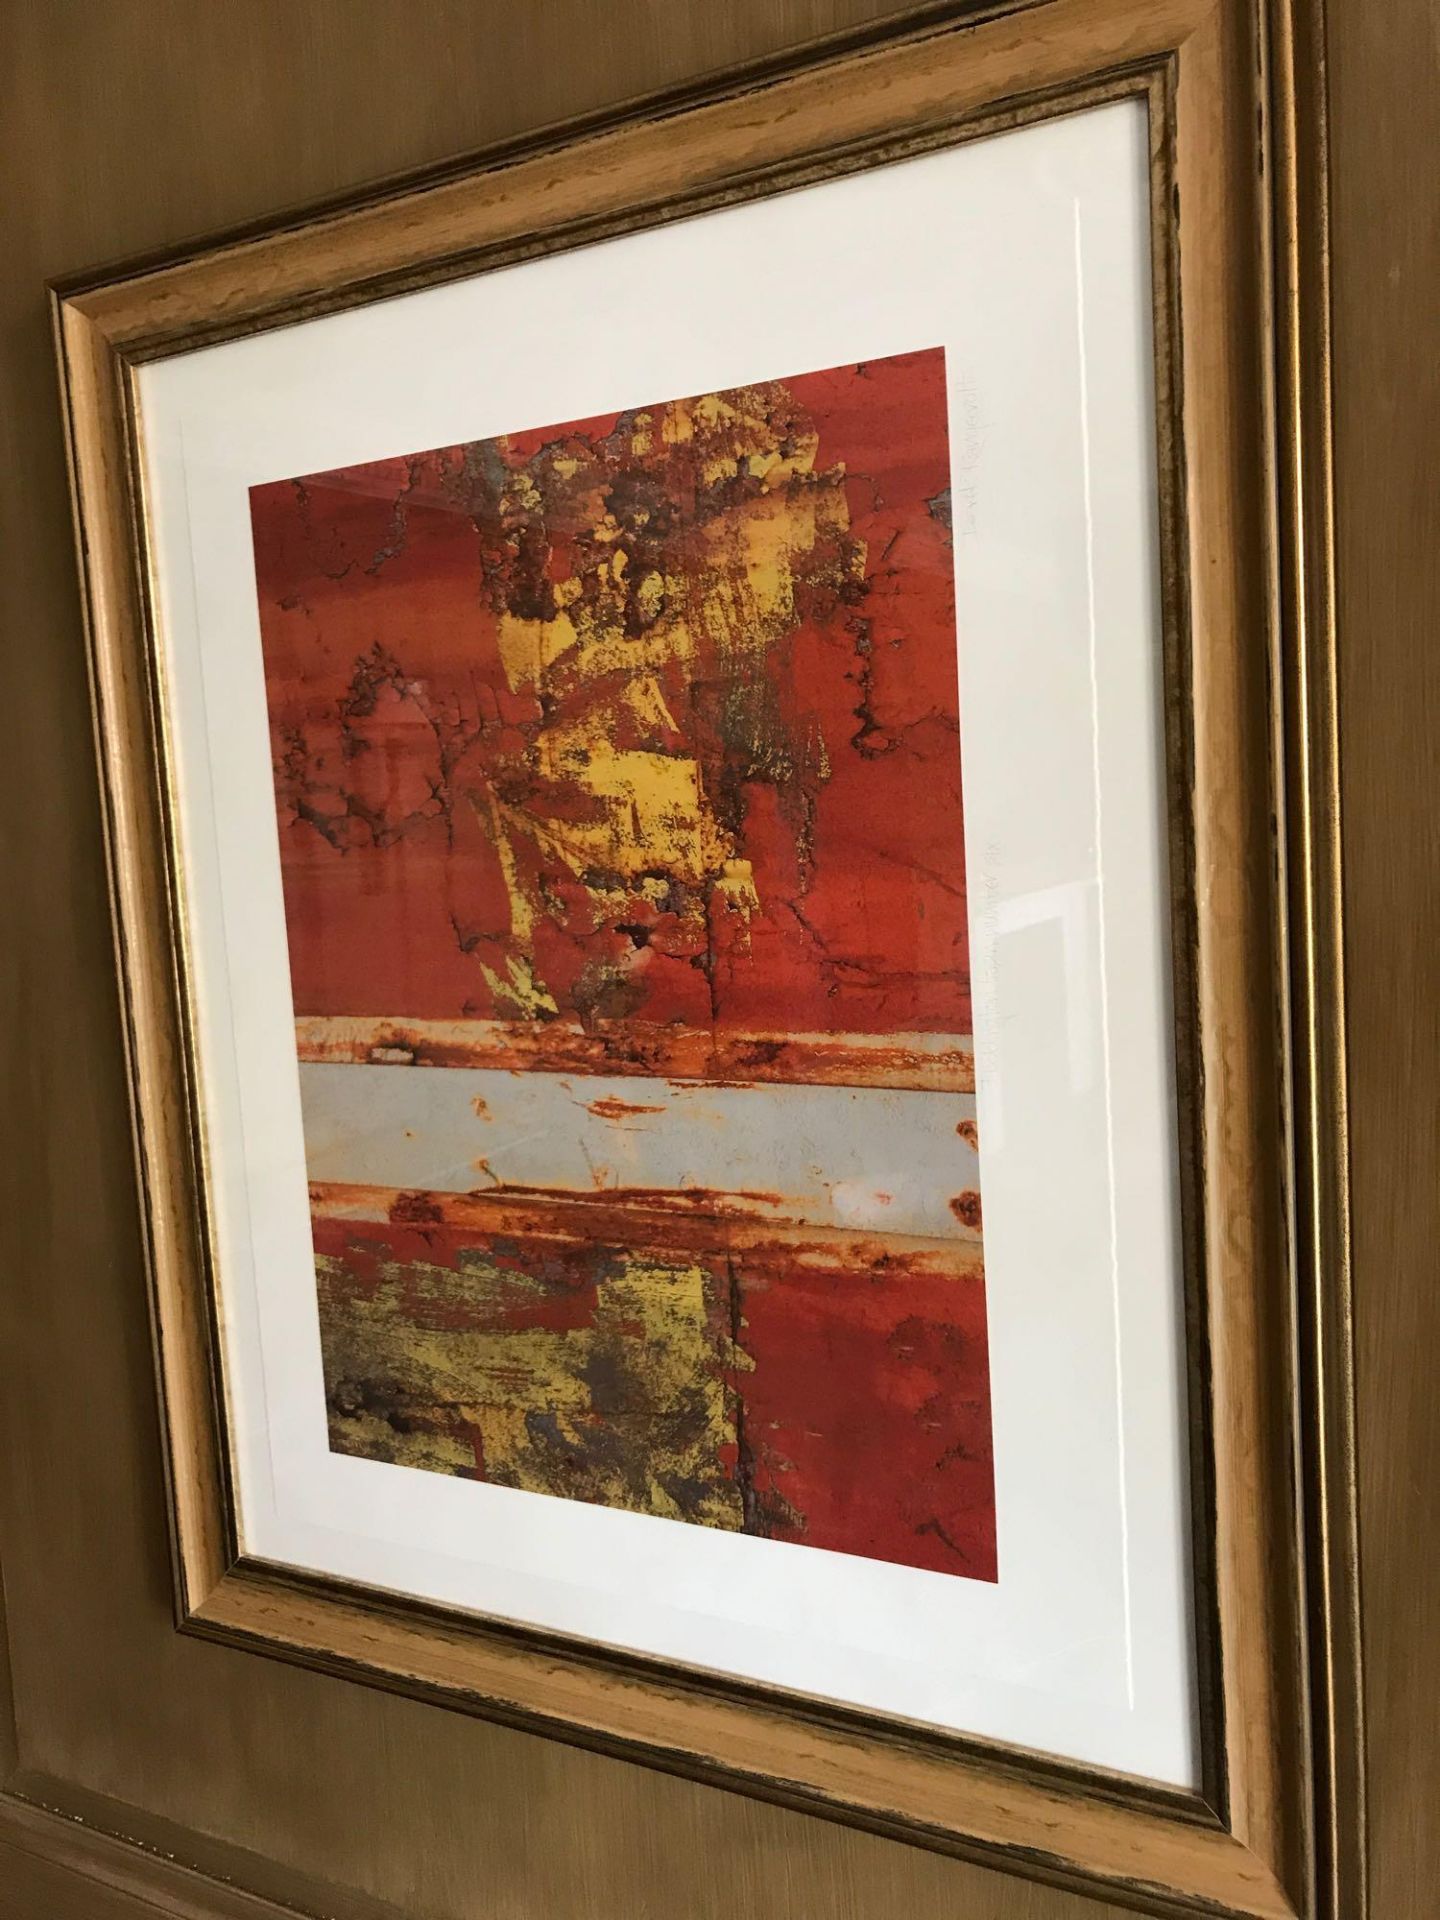 Abstract Framed Lithograph Red Blue And Gold In Gold Frame 73x 88cm Room 611